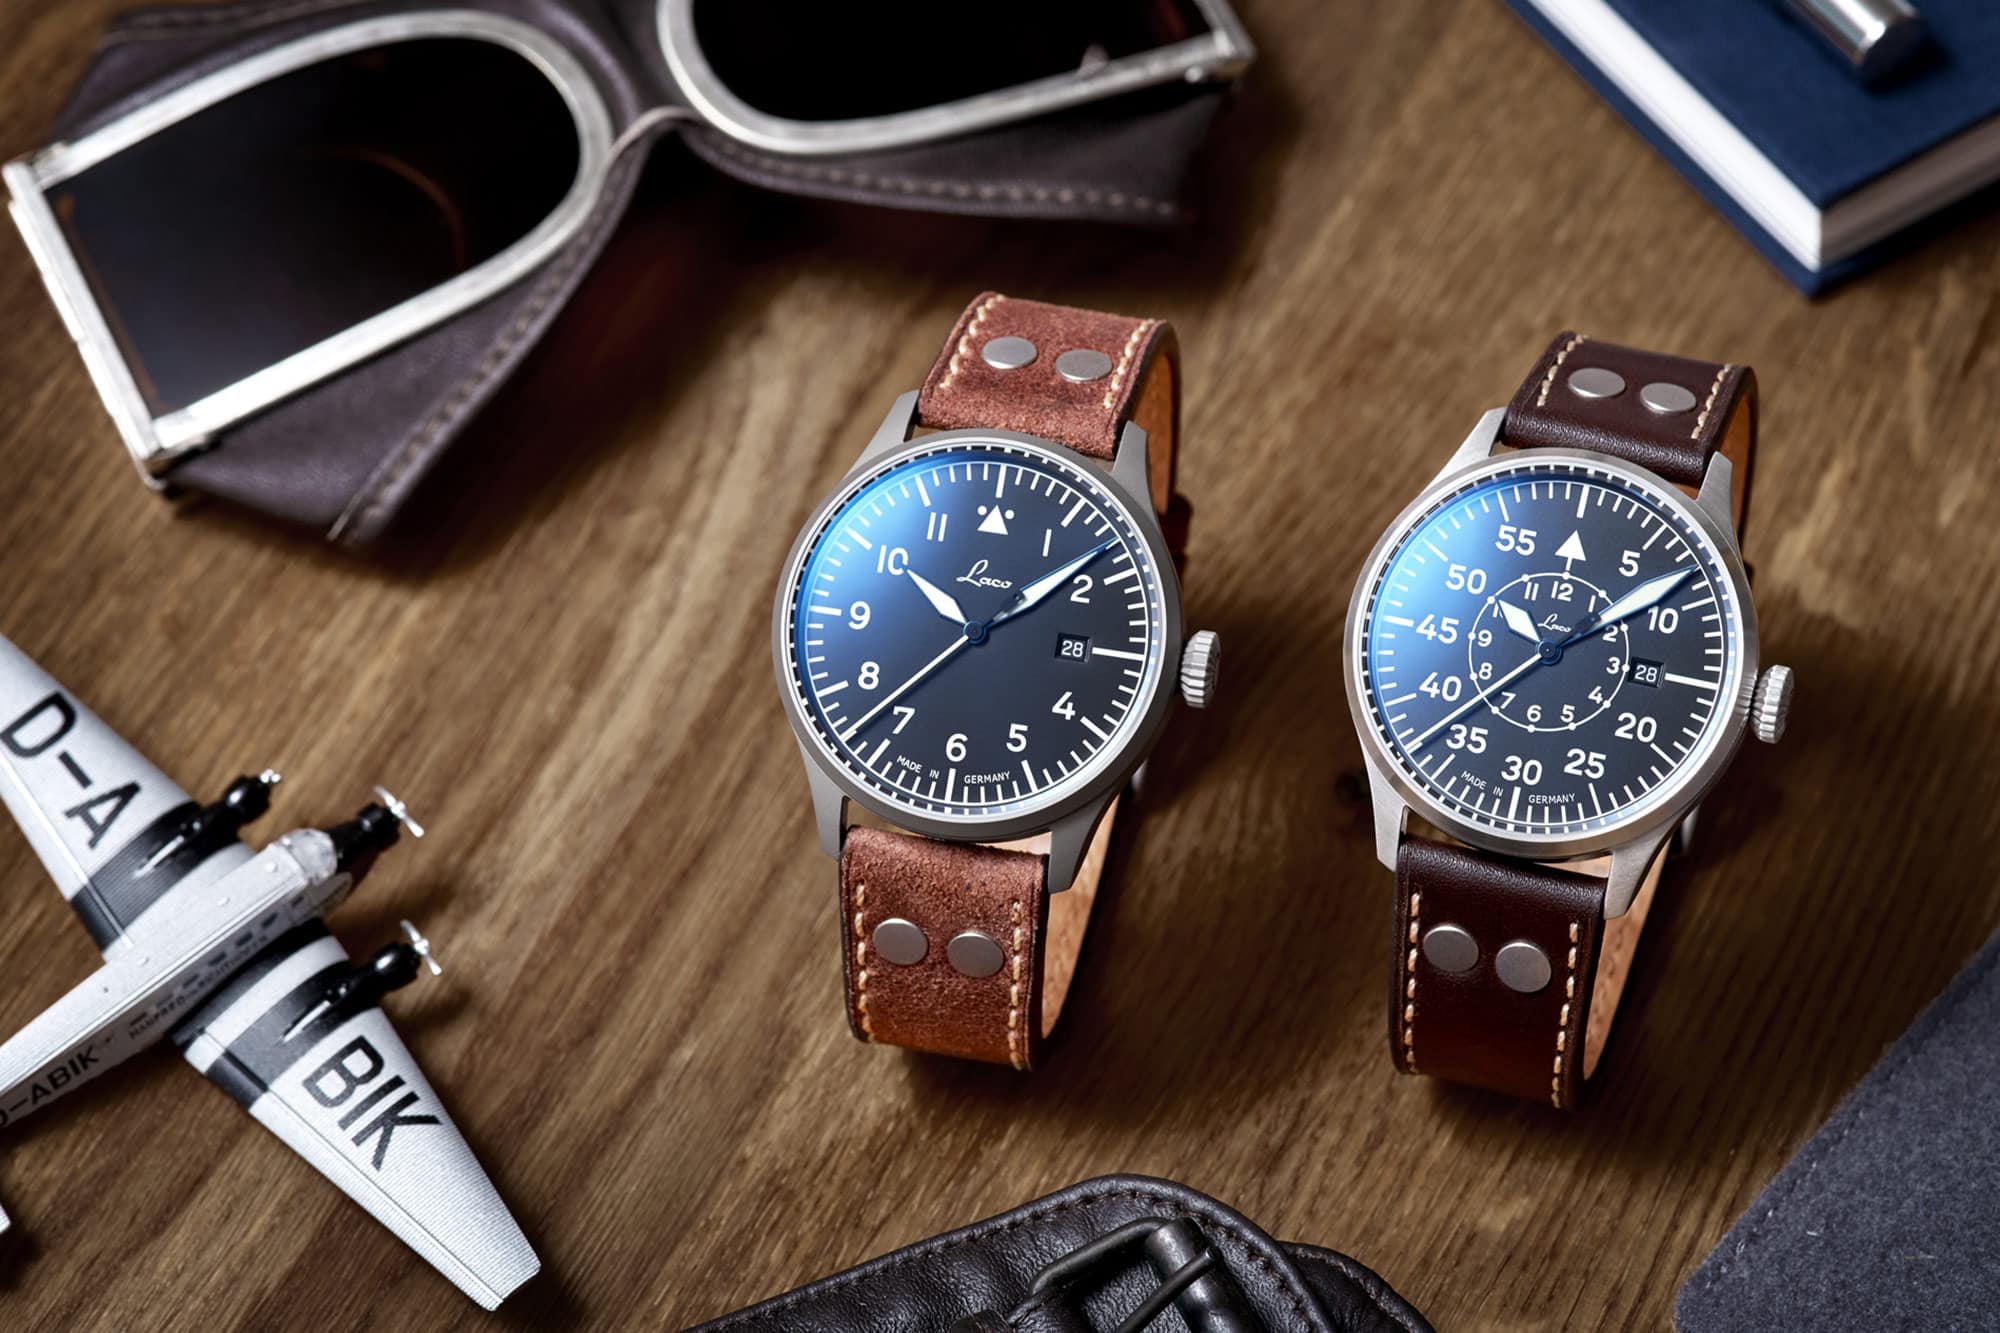 Laco Introduces the Flieger PRO, a New Line of Fully Customizable Watches